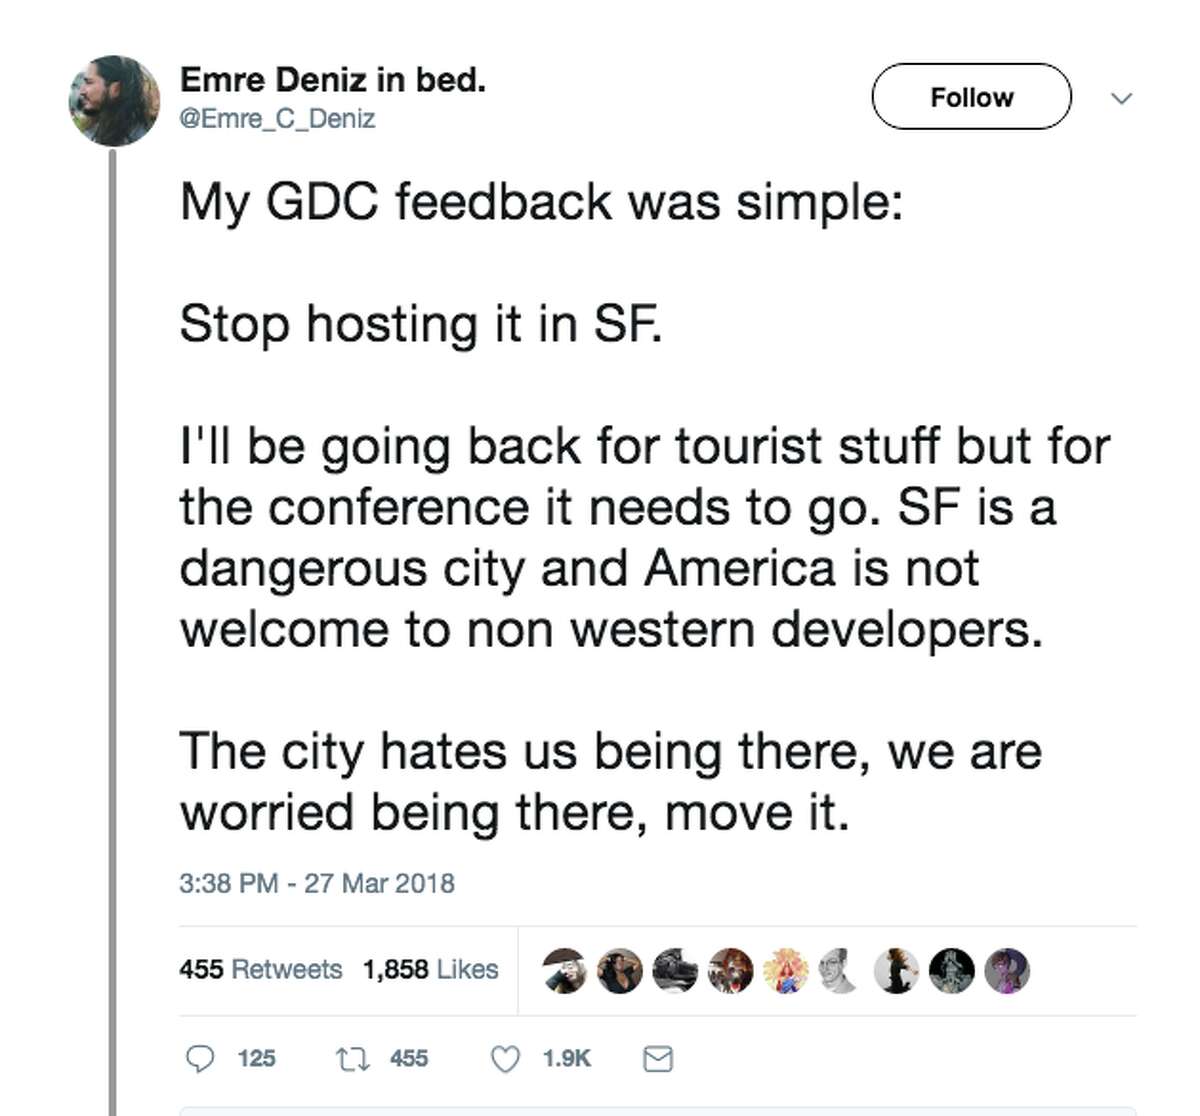 Attendees at the Game Developers Conference, held the week of March 18 at San Francisco's Moscone Convention Center, detailed some of their less-than-savory experiences in the city during their week stay.